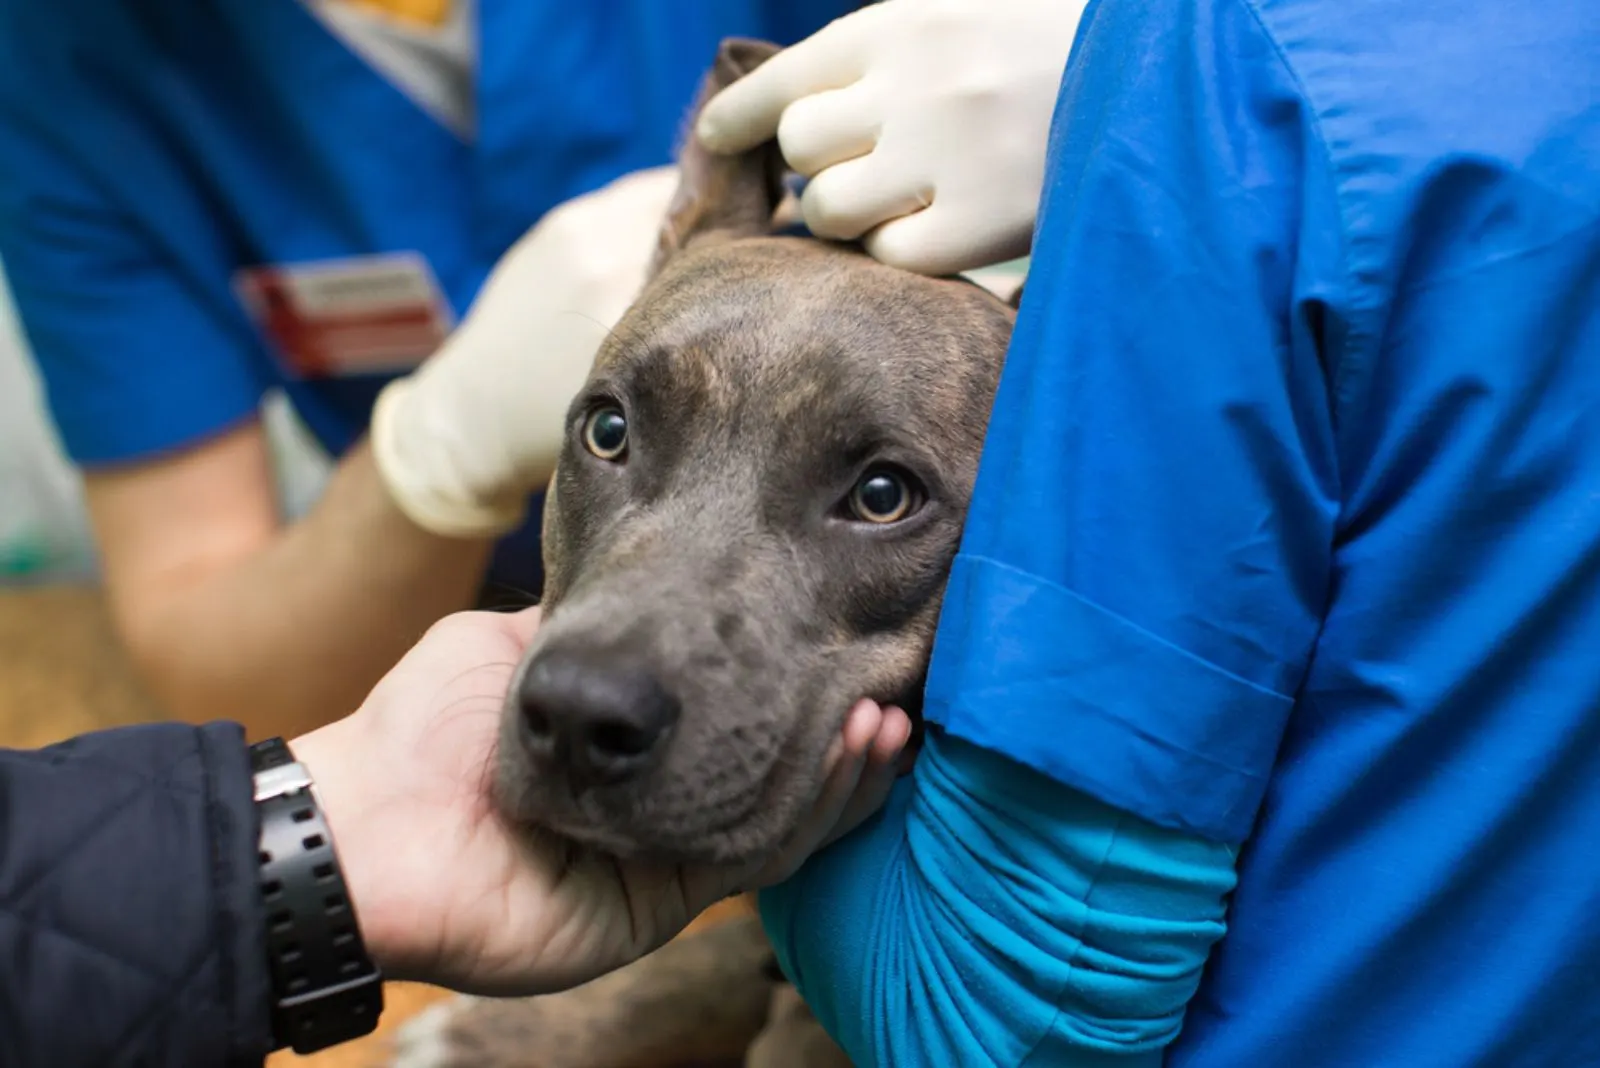 Veterinary inspection of the dog's ears before surgery